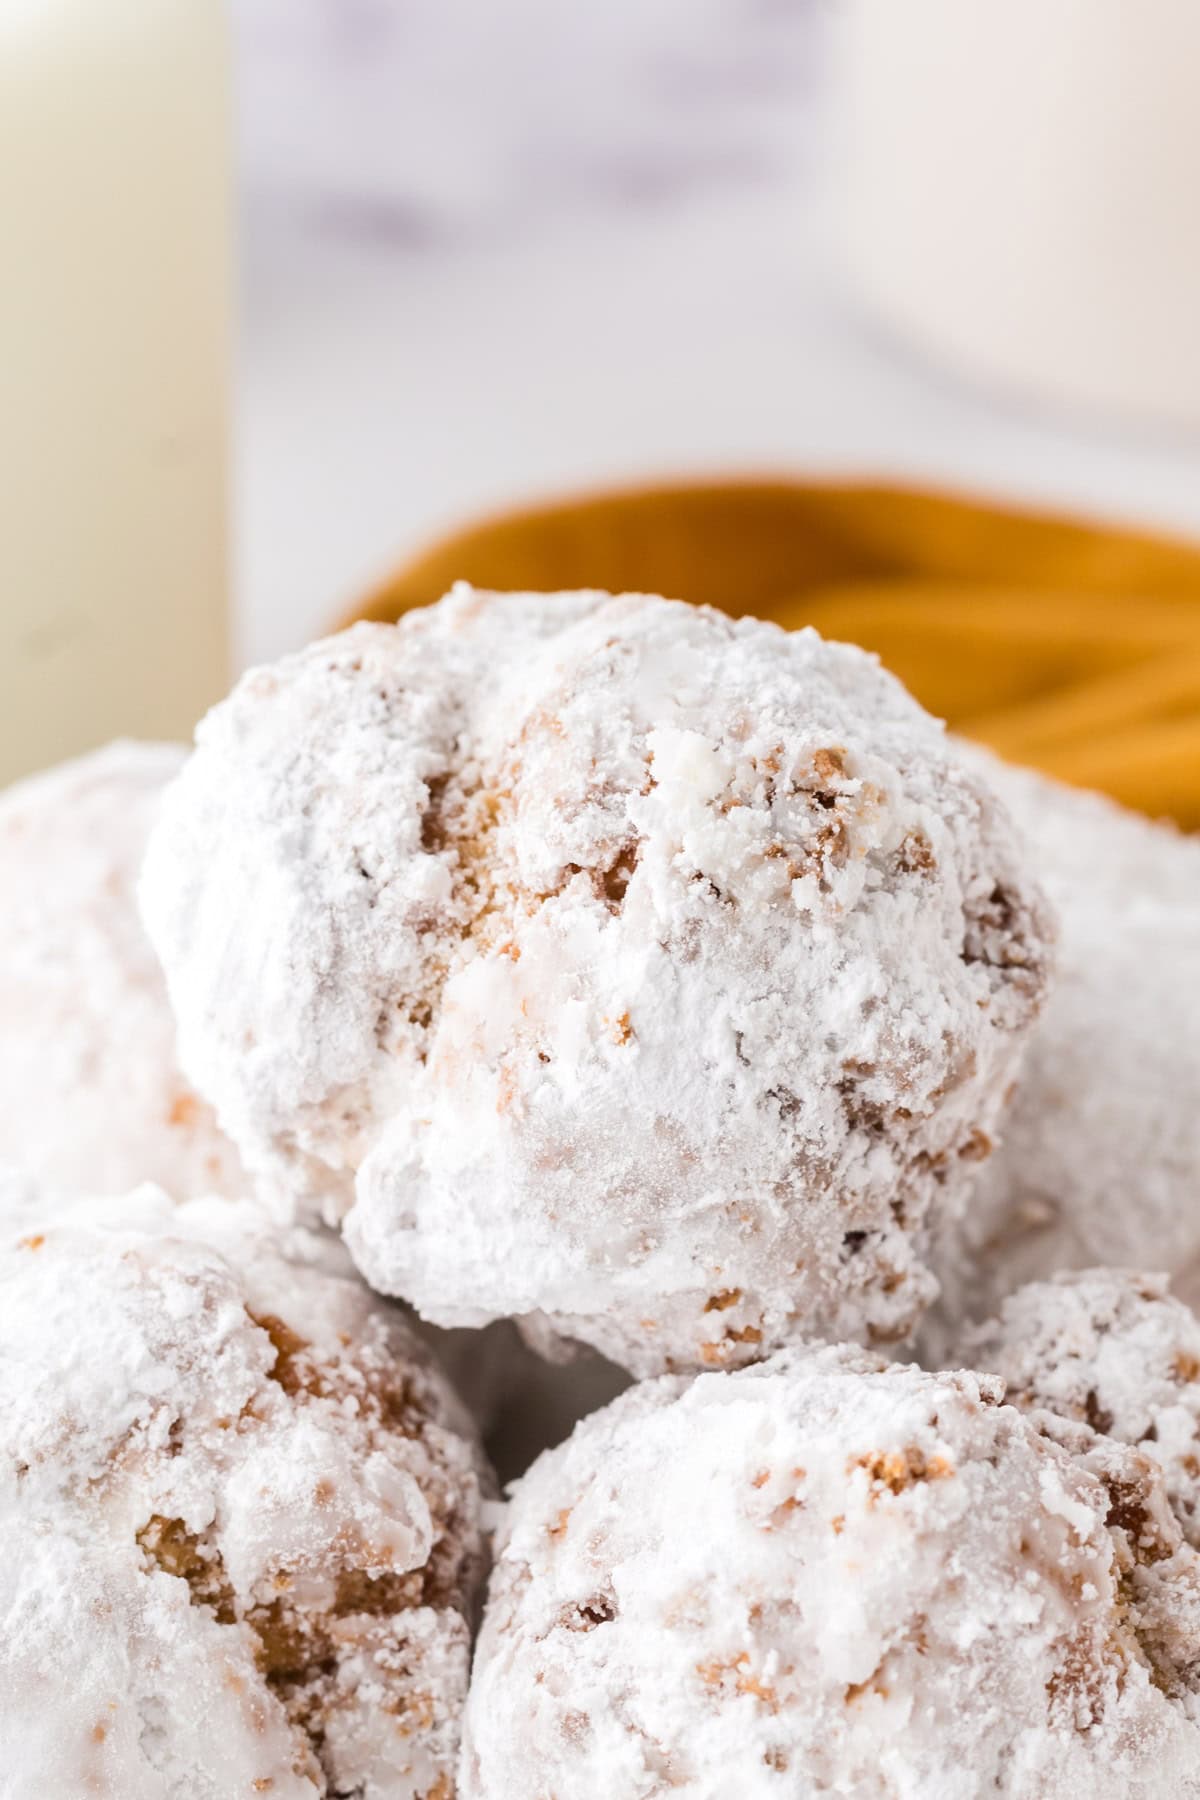 Up close view of a white powdered donut.